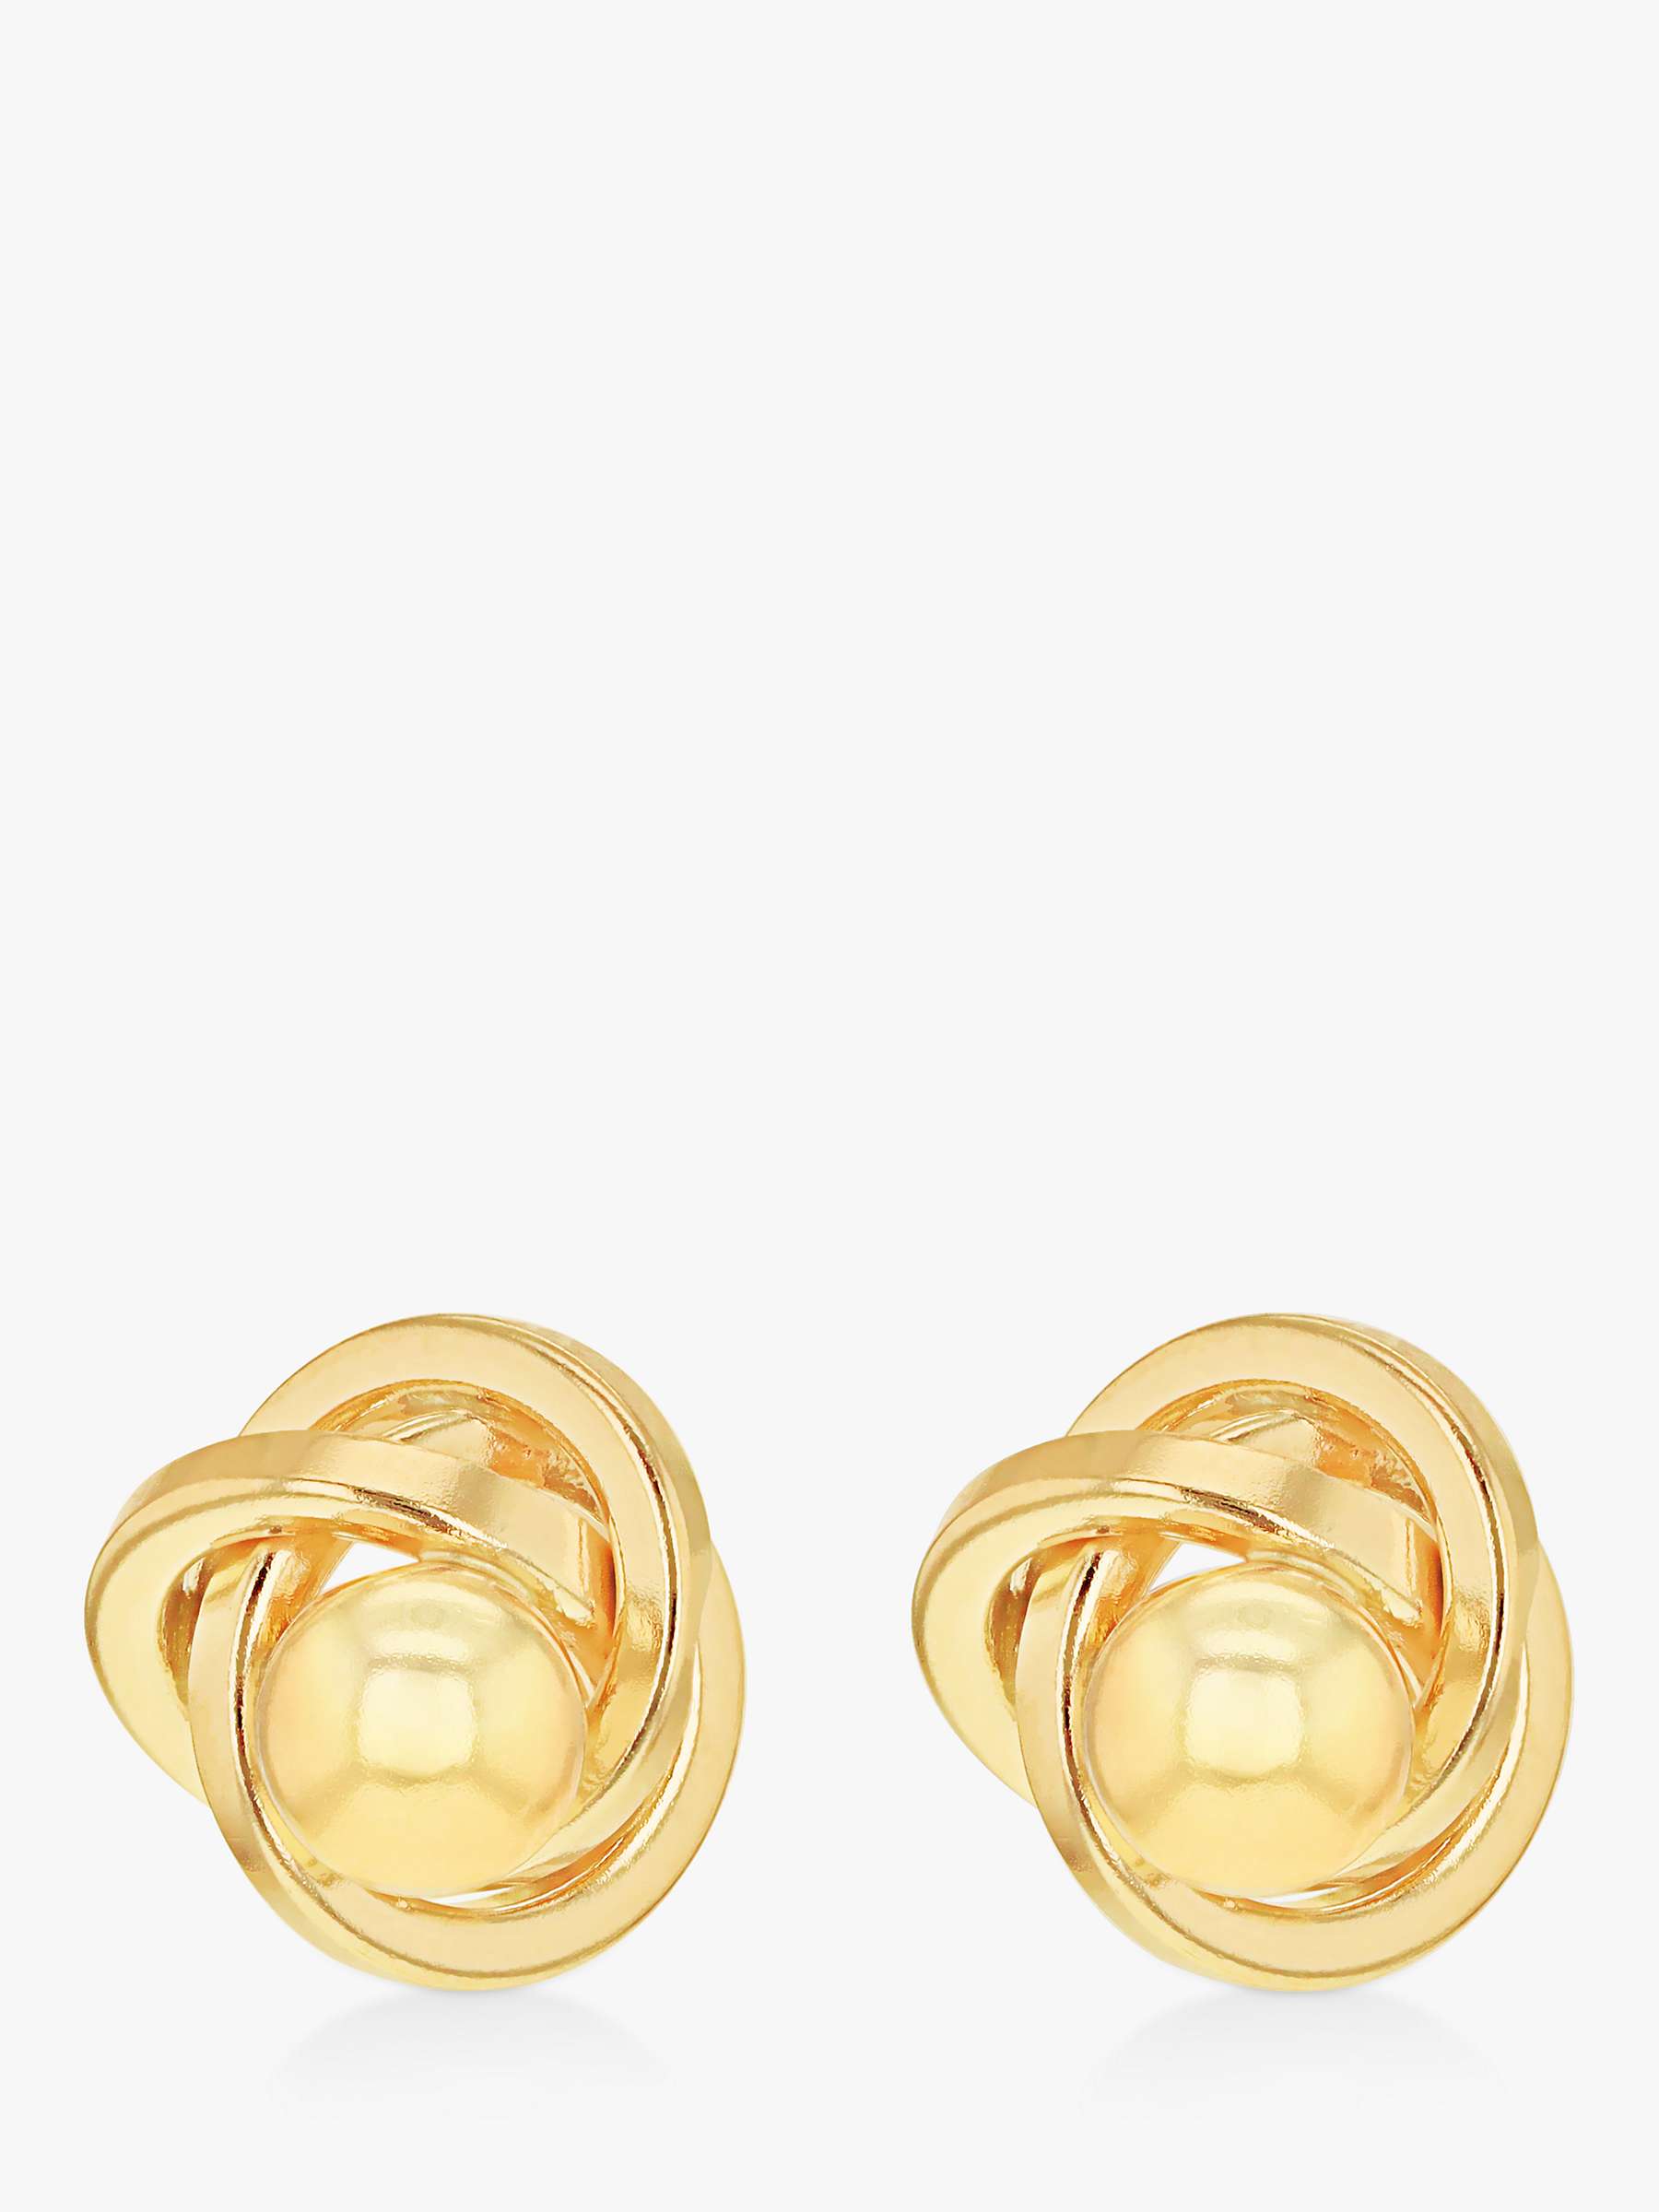 Buy IBB 9ct Yellow Gold Knot Stud Earrings, Yellow Gold Online at johnlewis.com